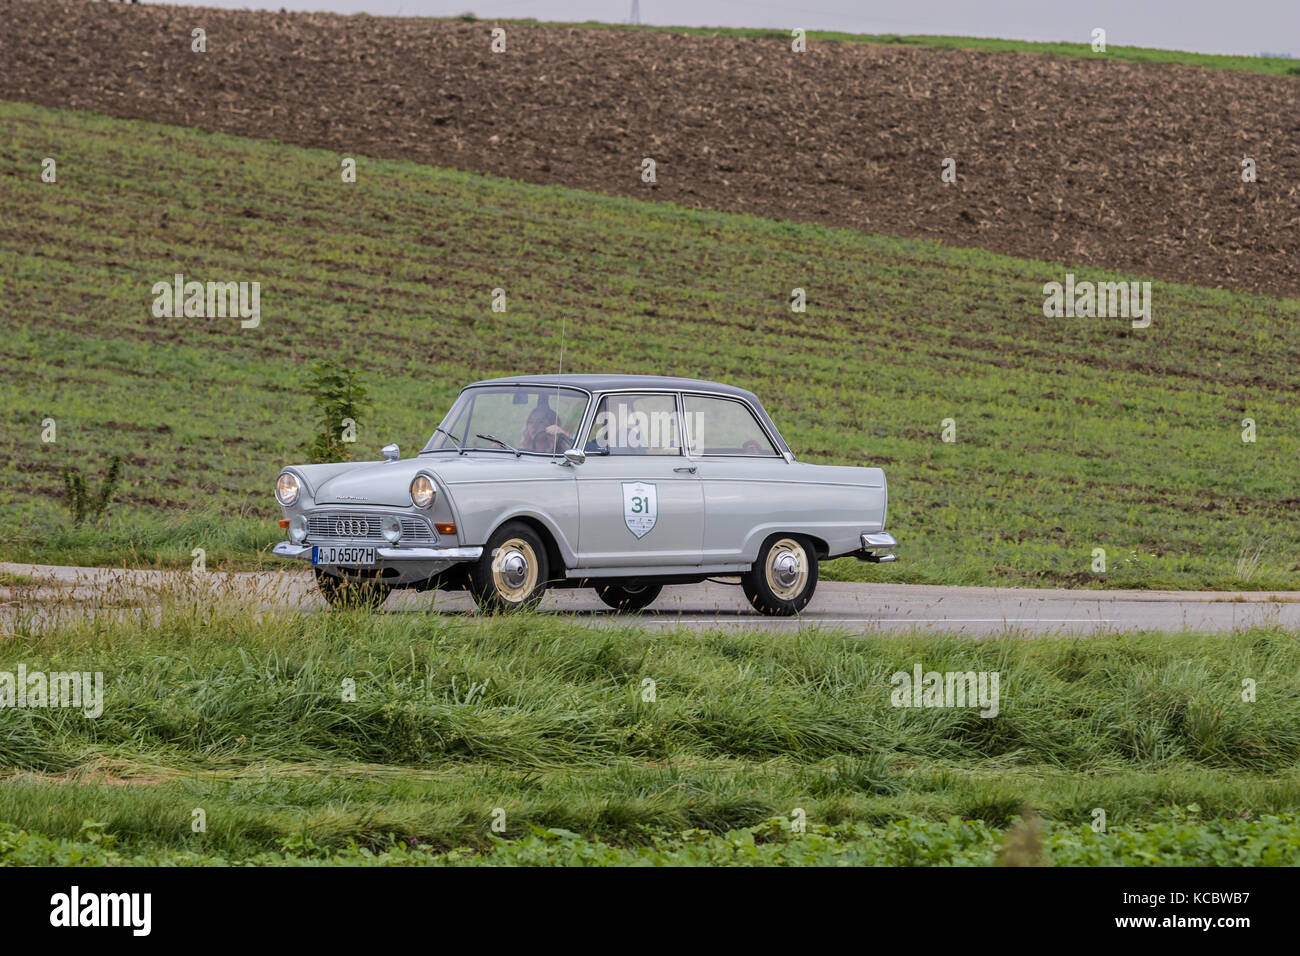 Augsburg, Germany - October 1, 2017: Auto Union DKW F11 oldtimer car at the Fuggerstadt Classic 2017 Oldtimer Rallye on October 1, 2017 in Augsburg, G Stock Photo